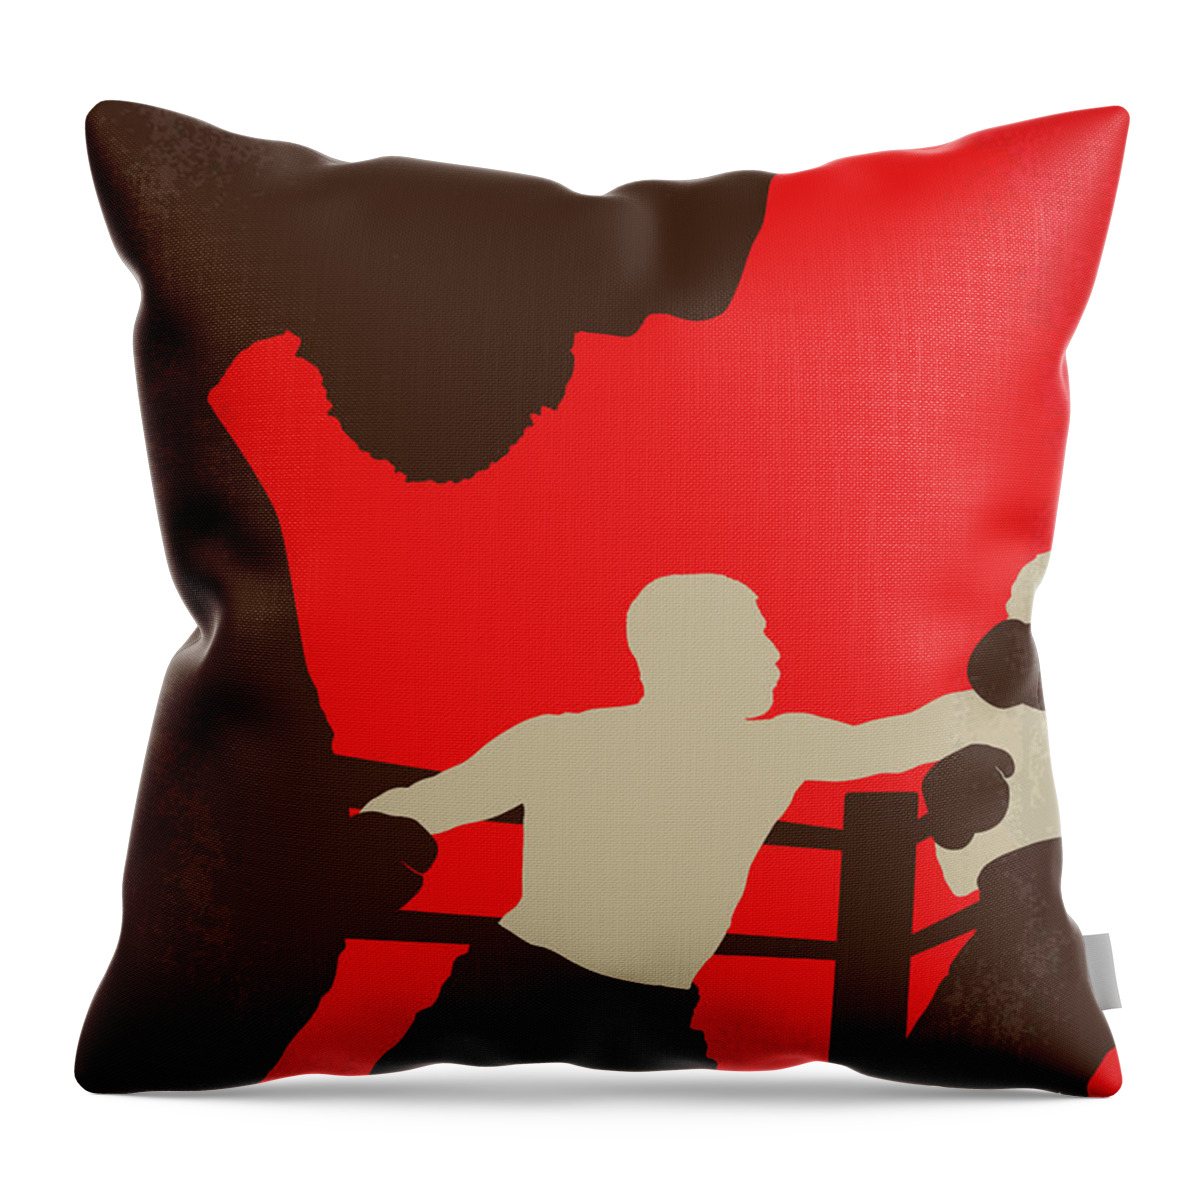 Southpaw Throw Pillow featuring the digital art No723 My Southpaw minimal movie poster by Chungkong Art